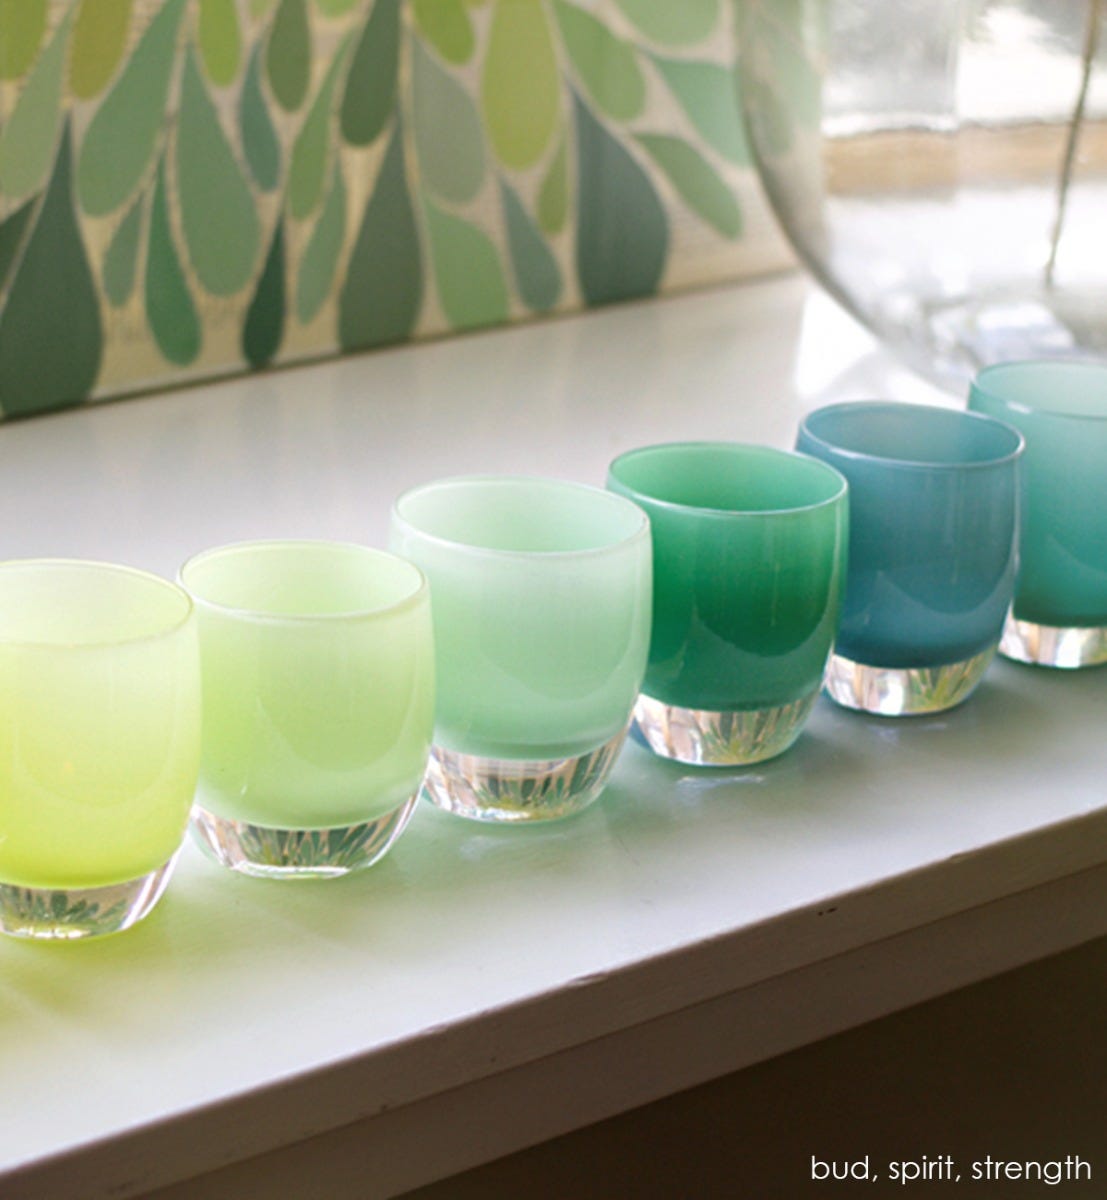 spirit, light mint green, hand-blown glass votive candle holder. Paired with bud and strength.